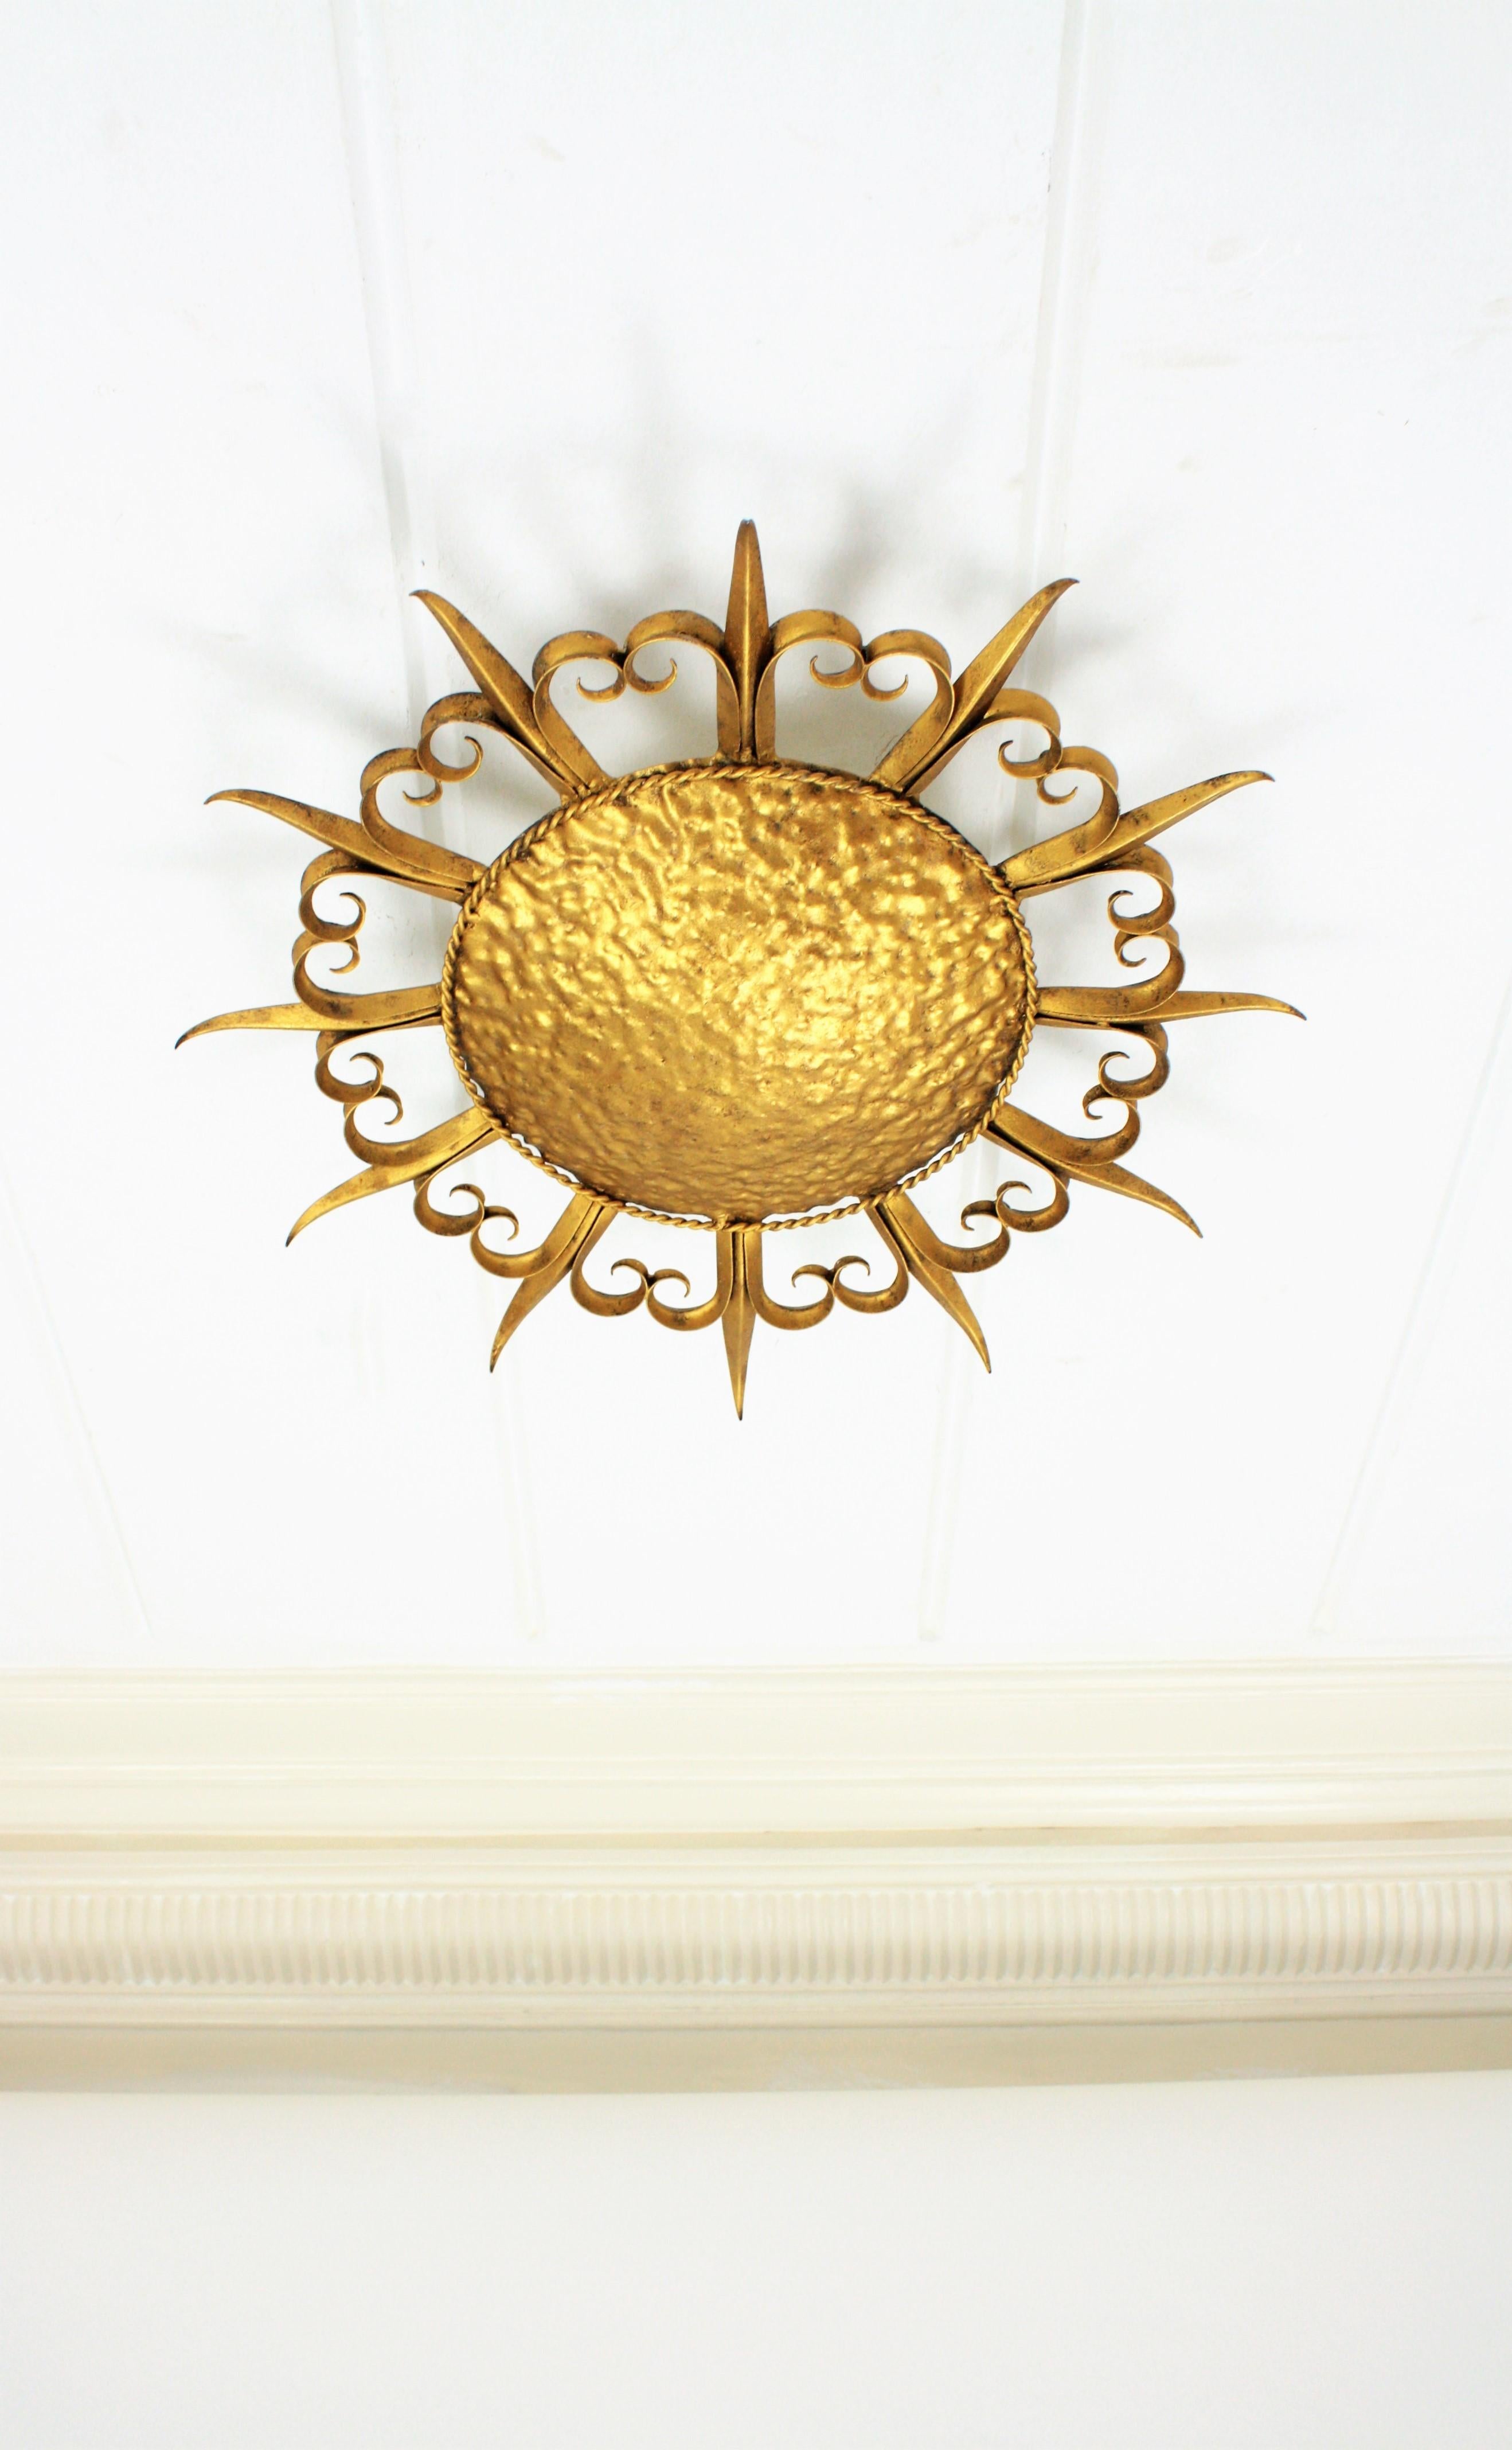 French midcentury gilt iron eyelash sunburst ceiling light fixture / wall sconce, 1950s.
A hand-hammered large gilt iron sunburst light fixture with alternating eyelashed rays and straight rays. Handcrafted in France at the mid-20th century period.